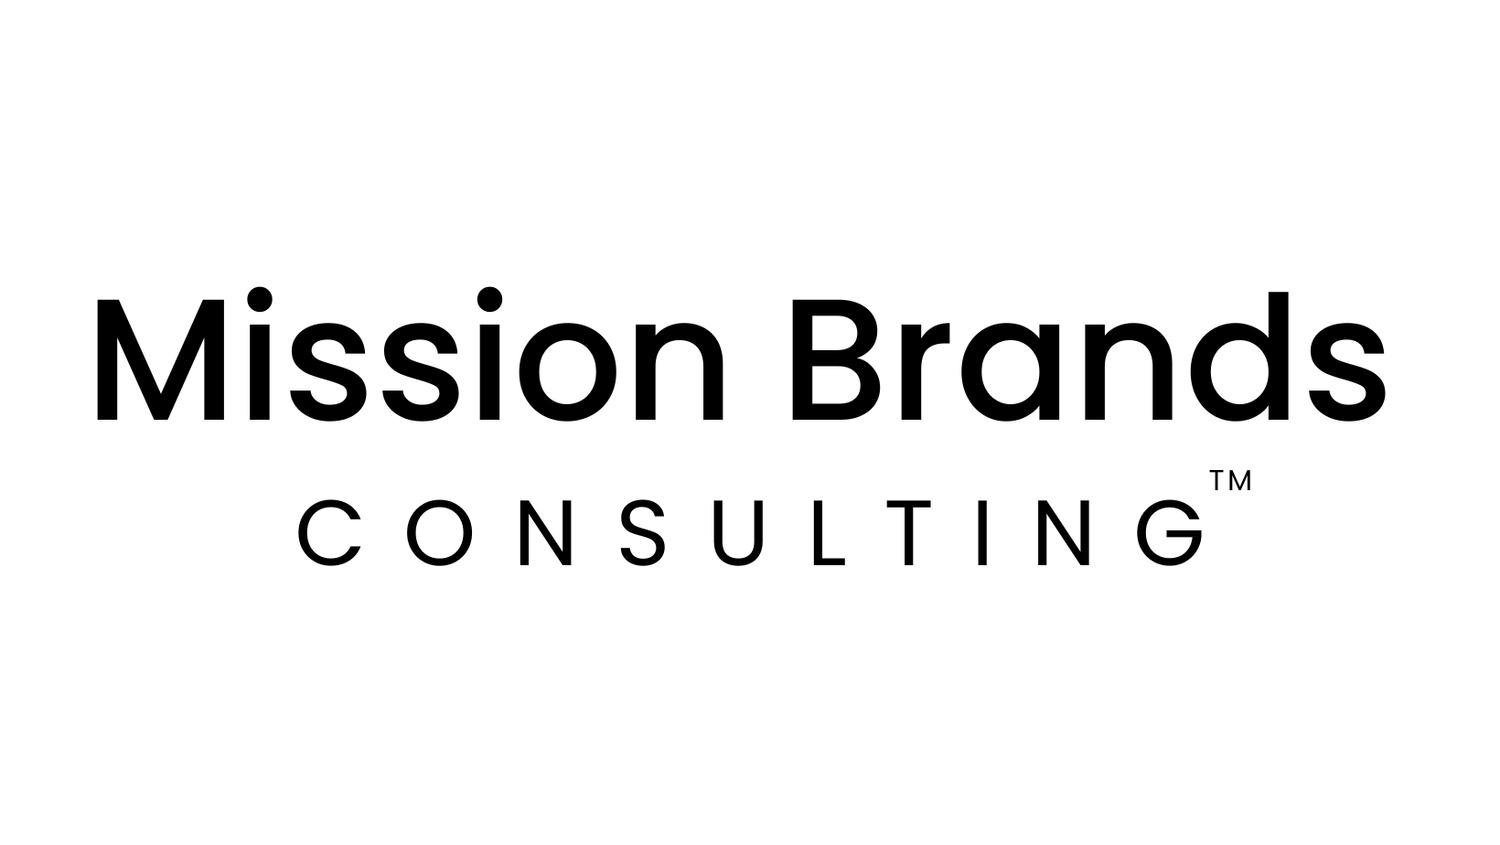 Mission Brands Consulting